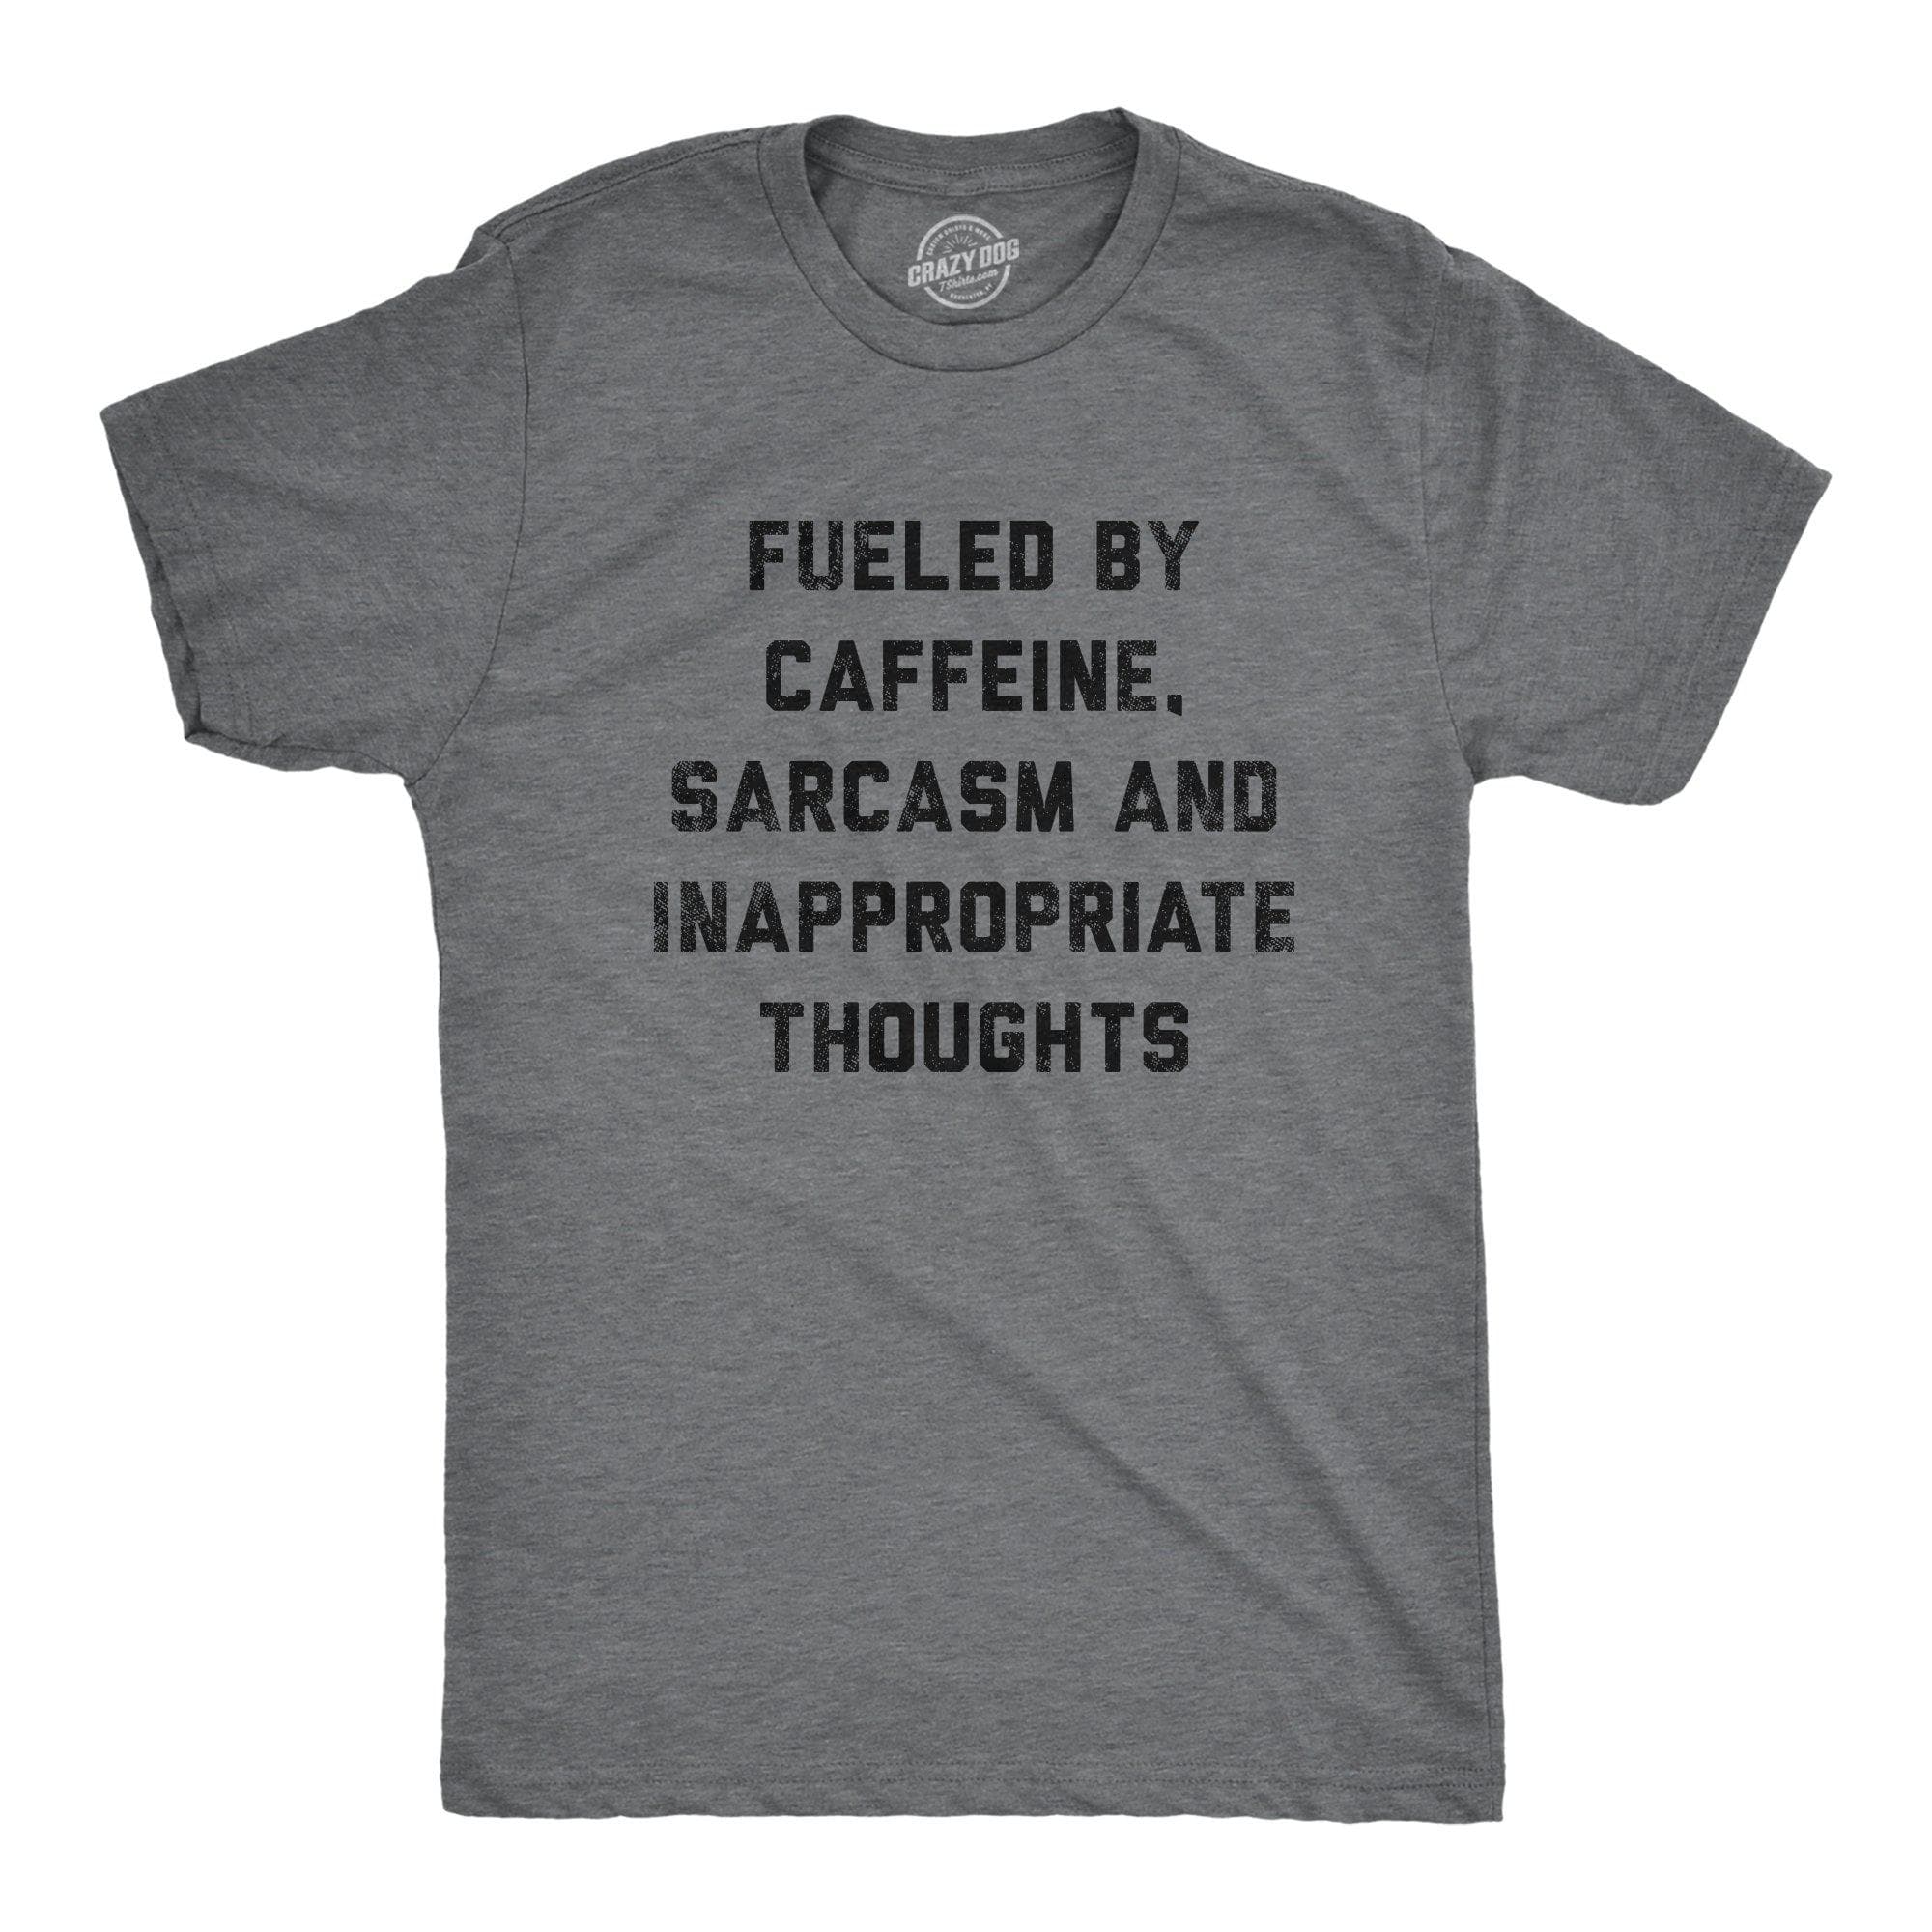 Fueled By Caffeine Sarcasm And Inappropriate Thoughts Men's Tshirt - Crazy Dog T-Shirts